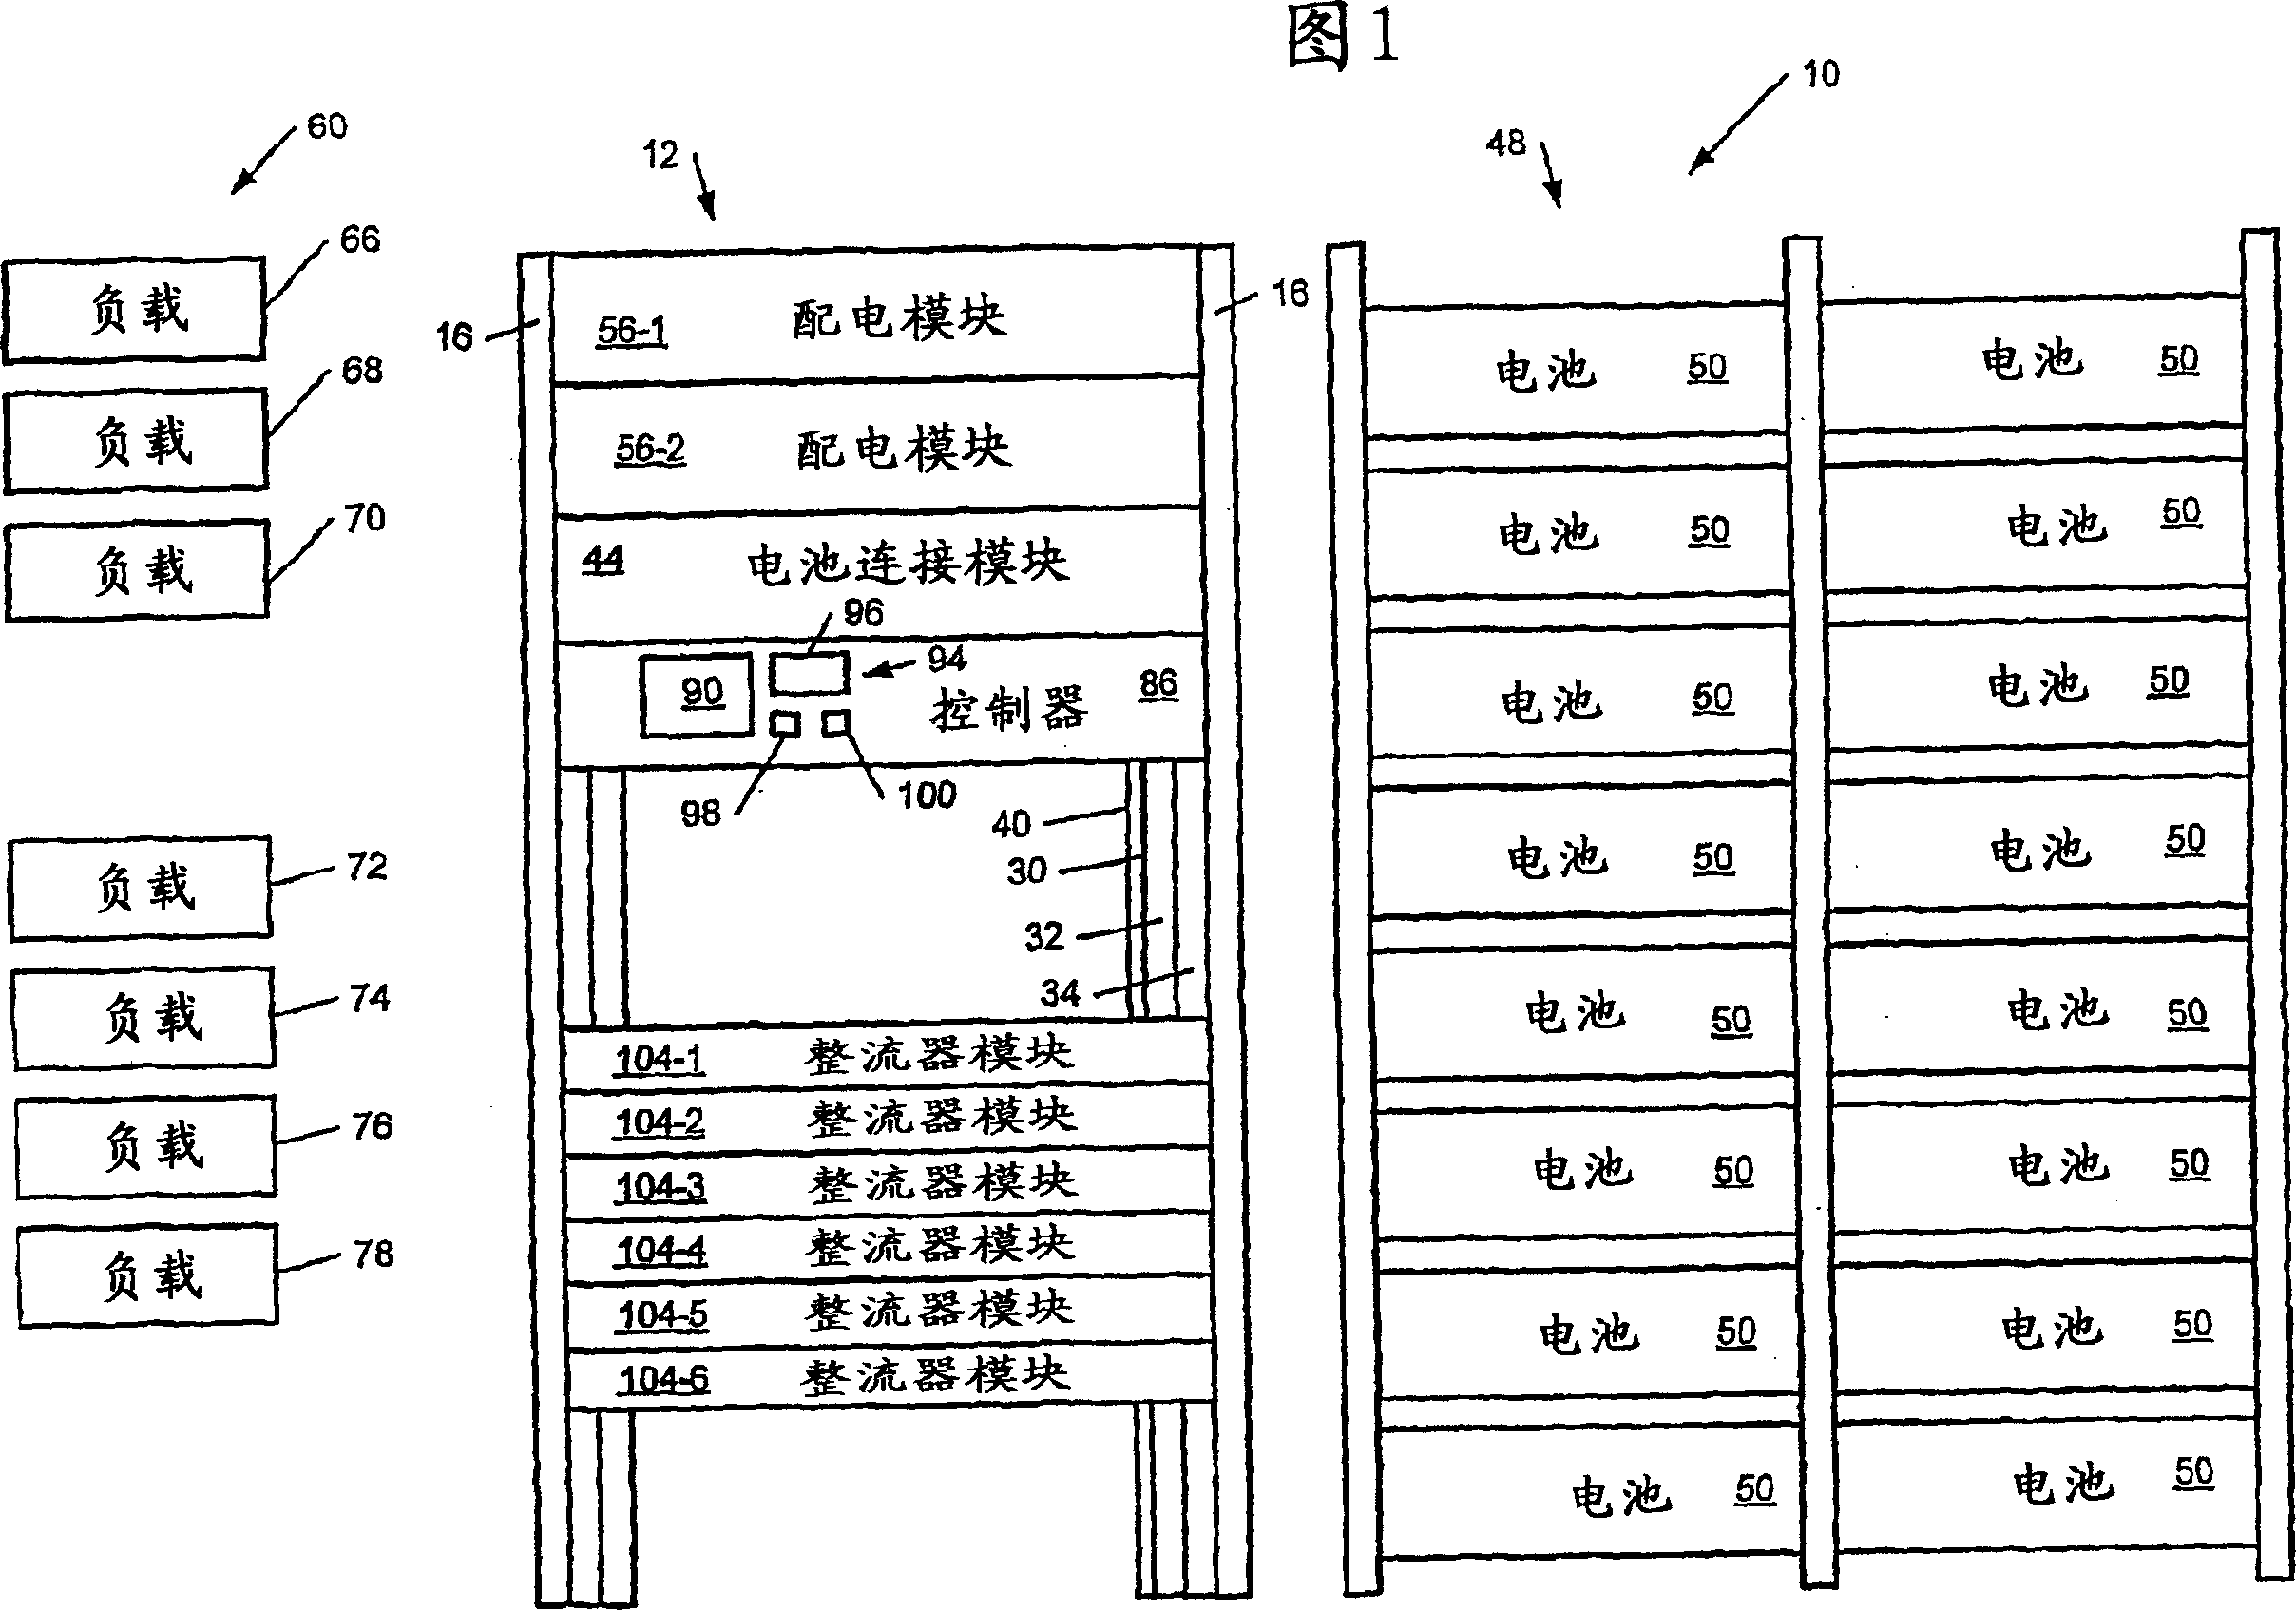 Automatic module configuration in a telecommunications power system and battery configuration with a click